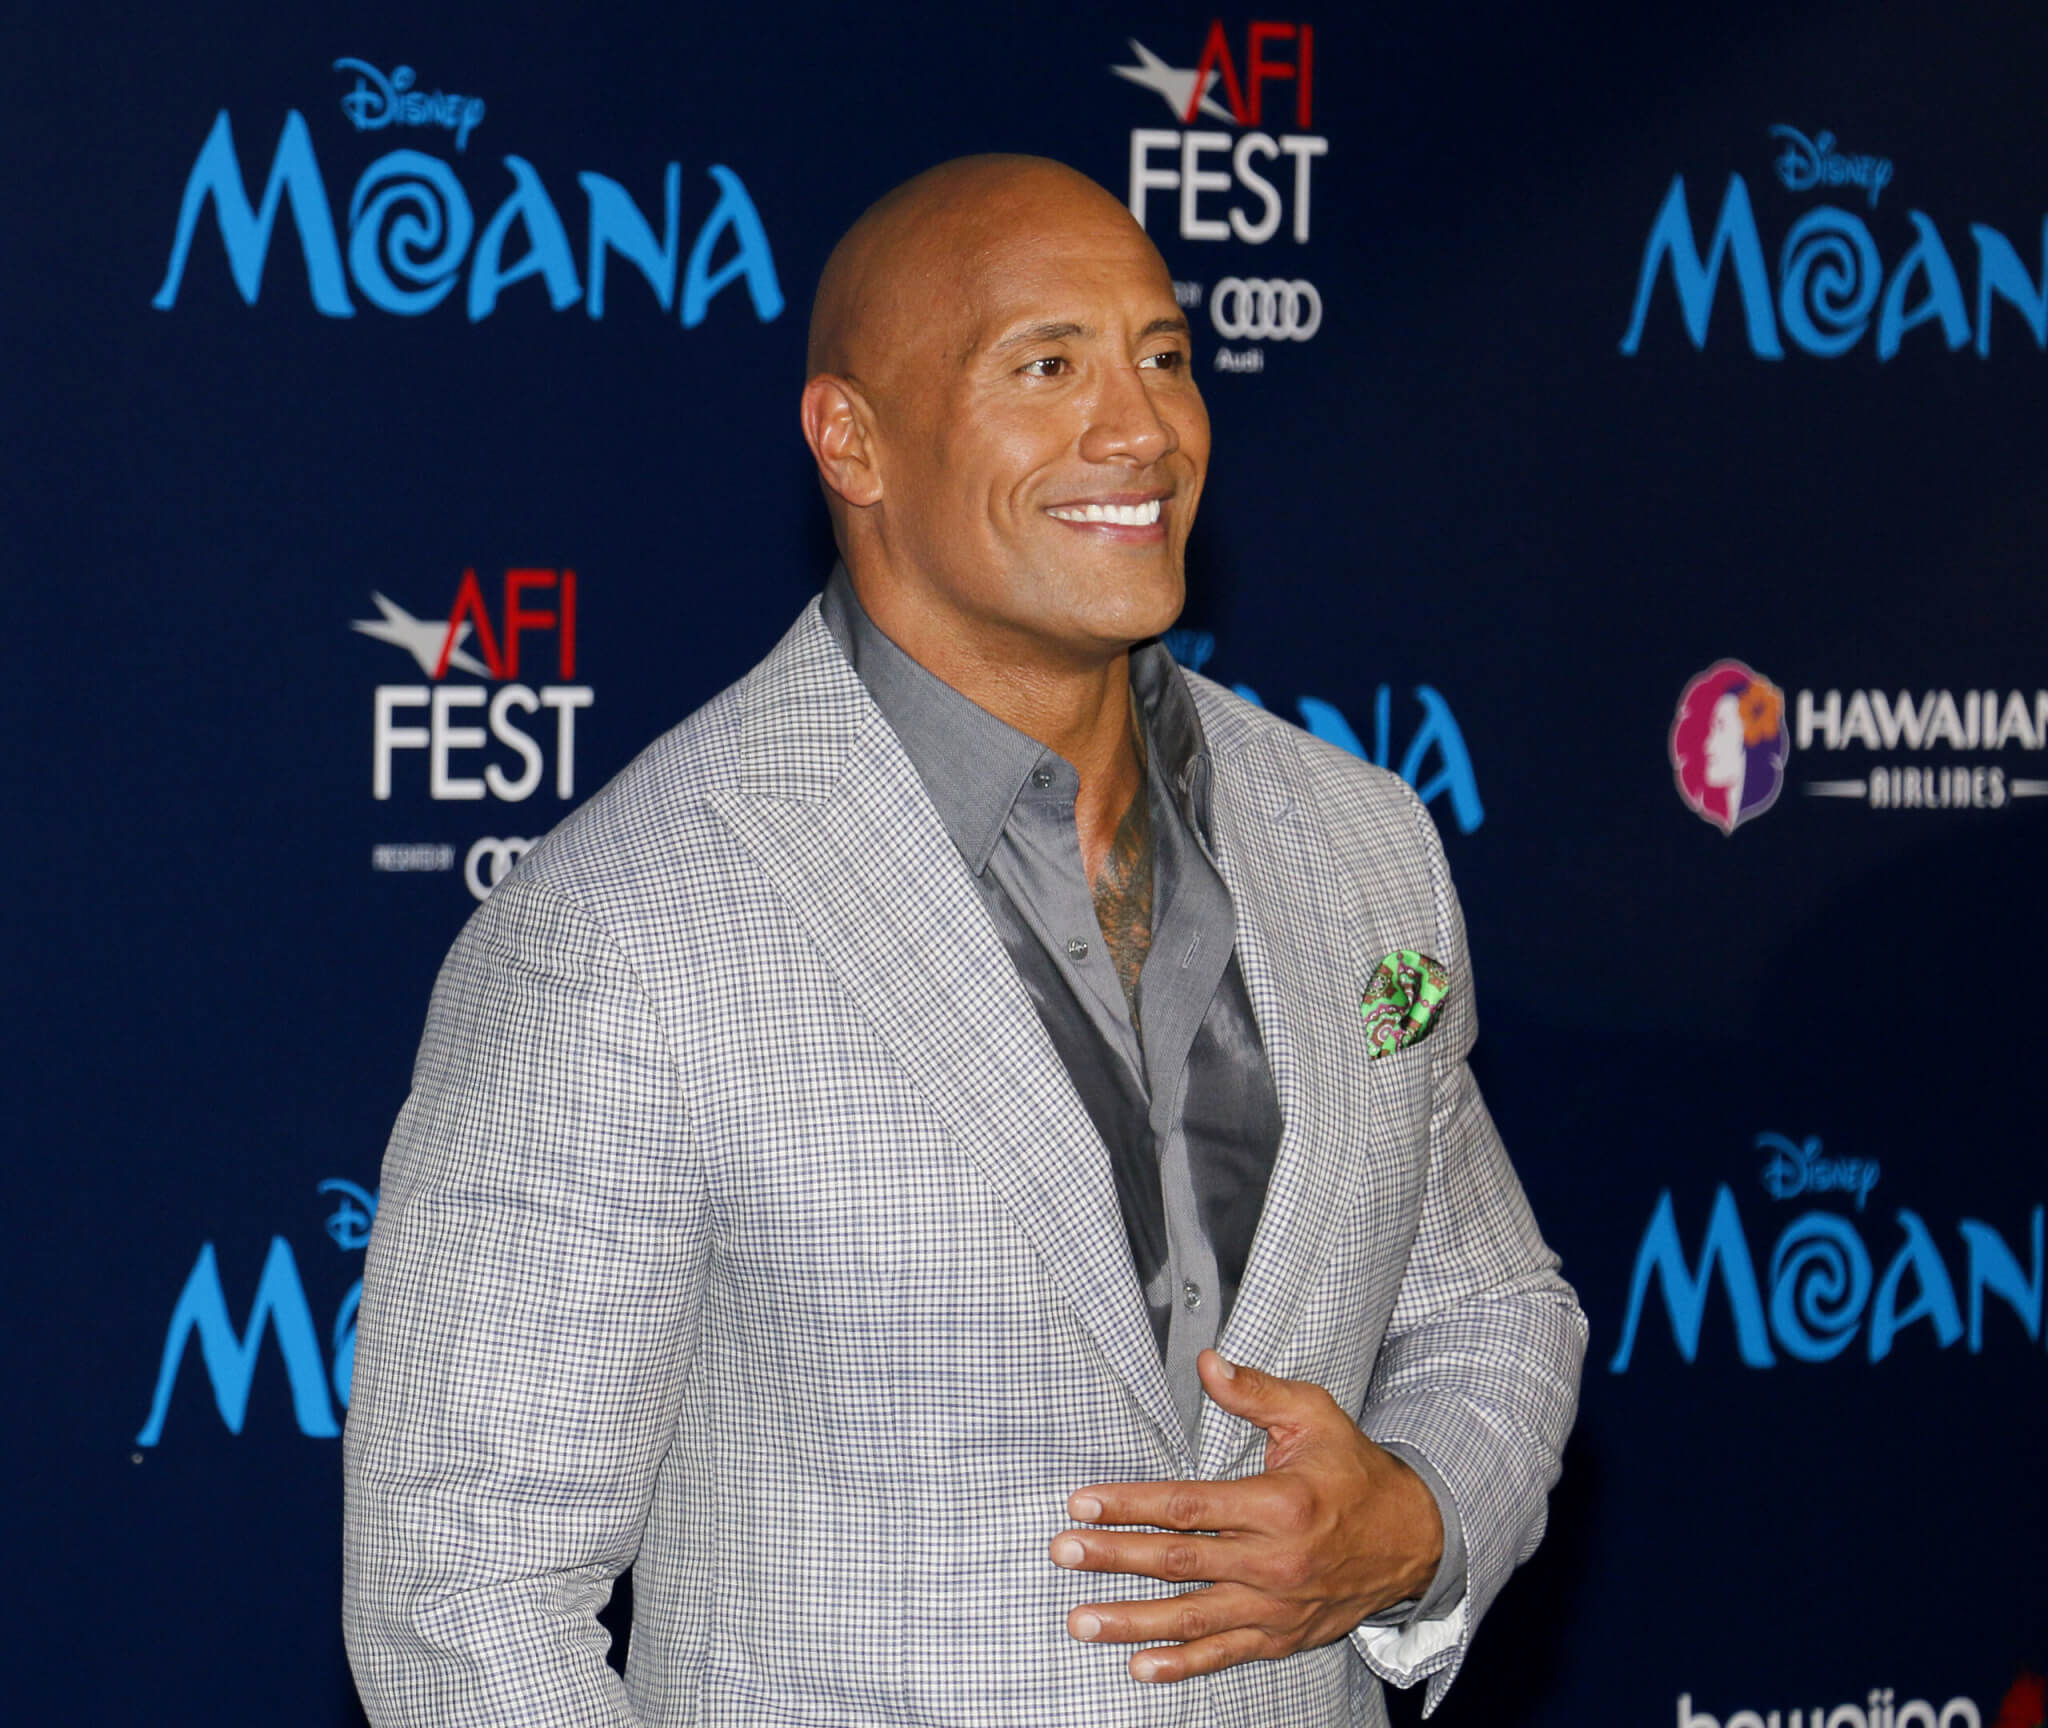 Dwayne Johnson at the AFI FEST 2016 Premiere of "Moana" in 2016